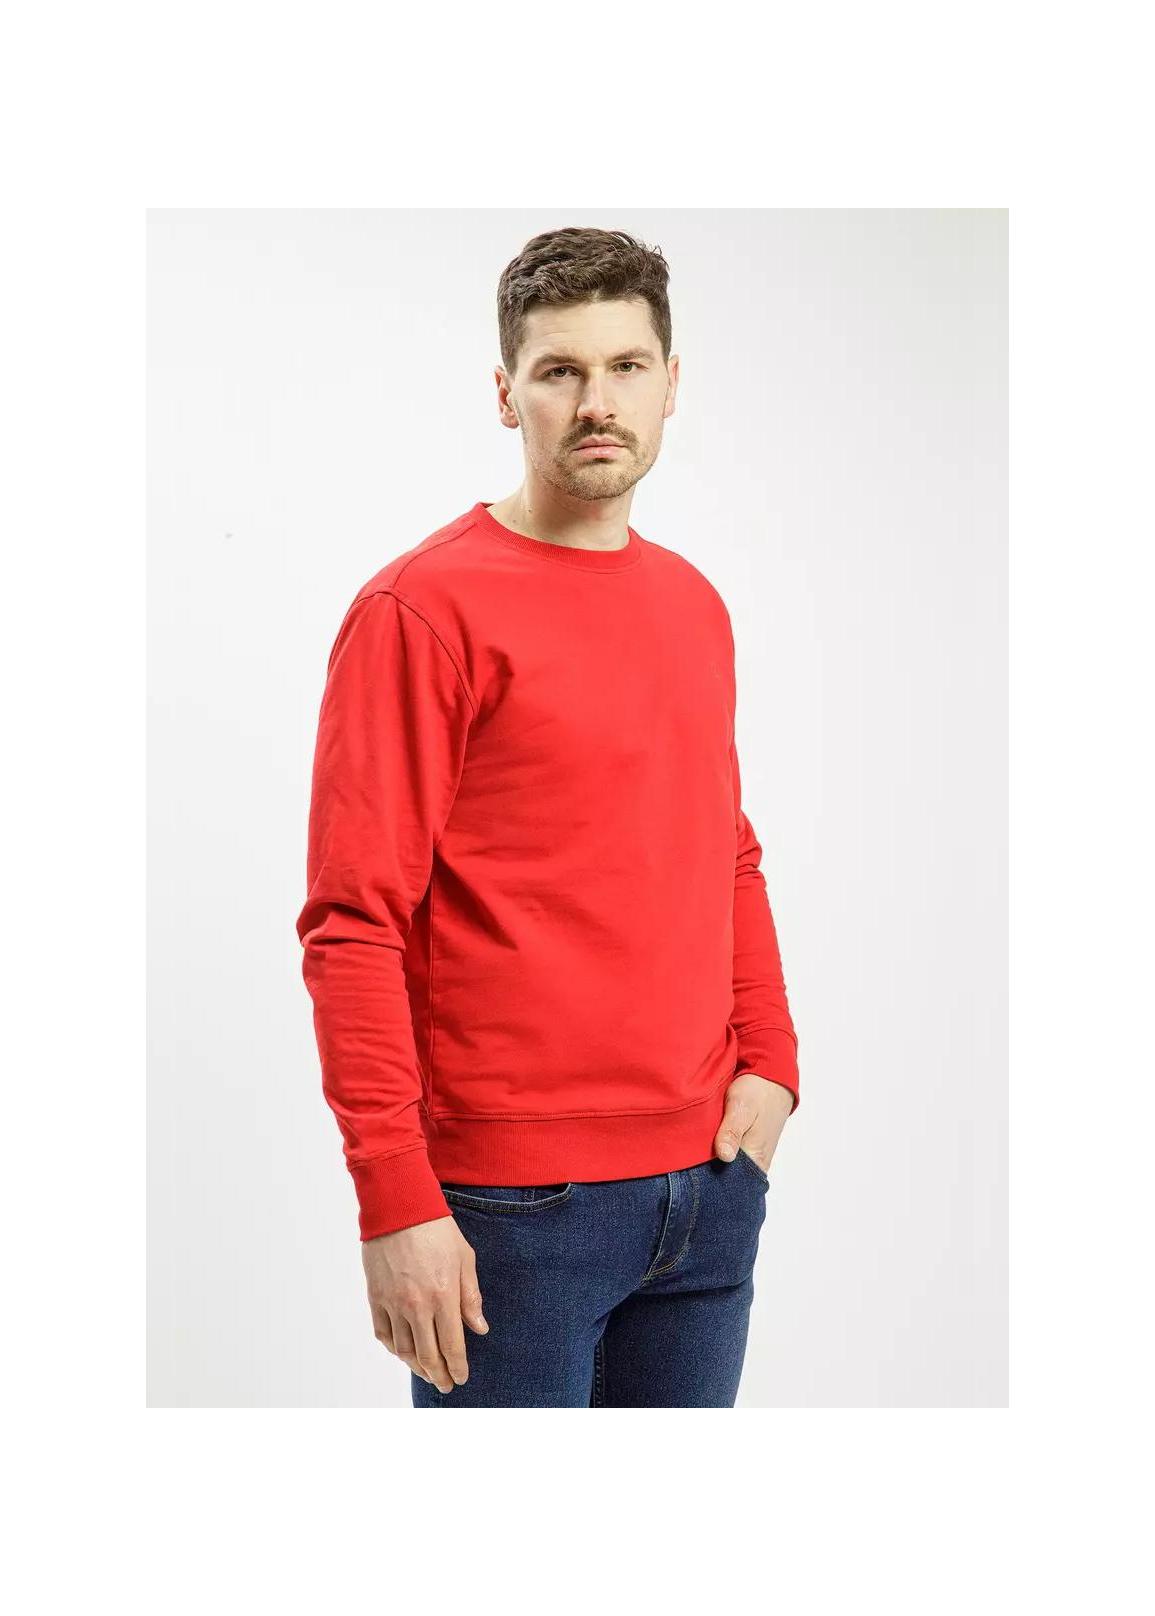 Cross Jeans® Sweater - Red (007)